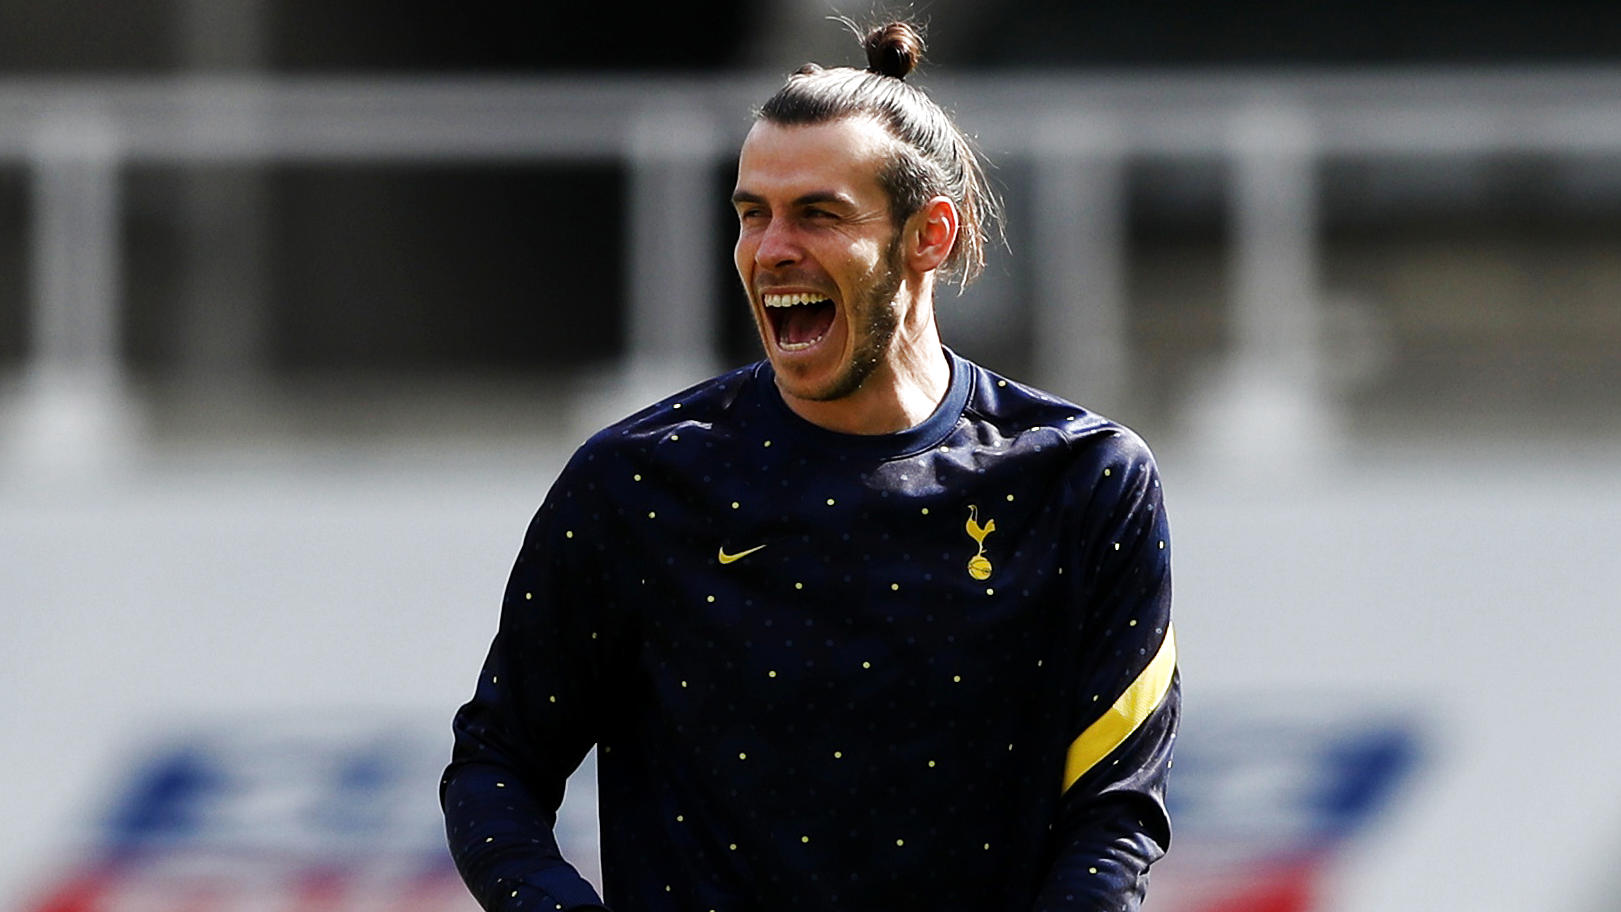 Soccer Football - Premier League - Newcastle United v Tottenham Hotspur - St James' Park, Newcastle, Britain - April 4, 2021 Tottenham Hotspur's Gareth Bale during the warm up before the match Pool via REUTERS/Scott Heppell EDITORIAL USE ONLY. No use